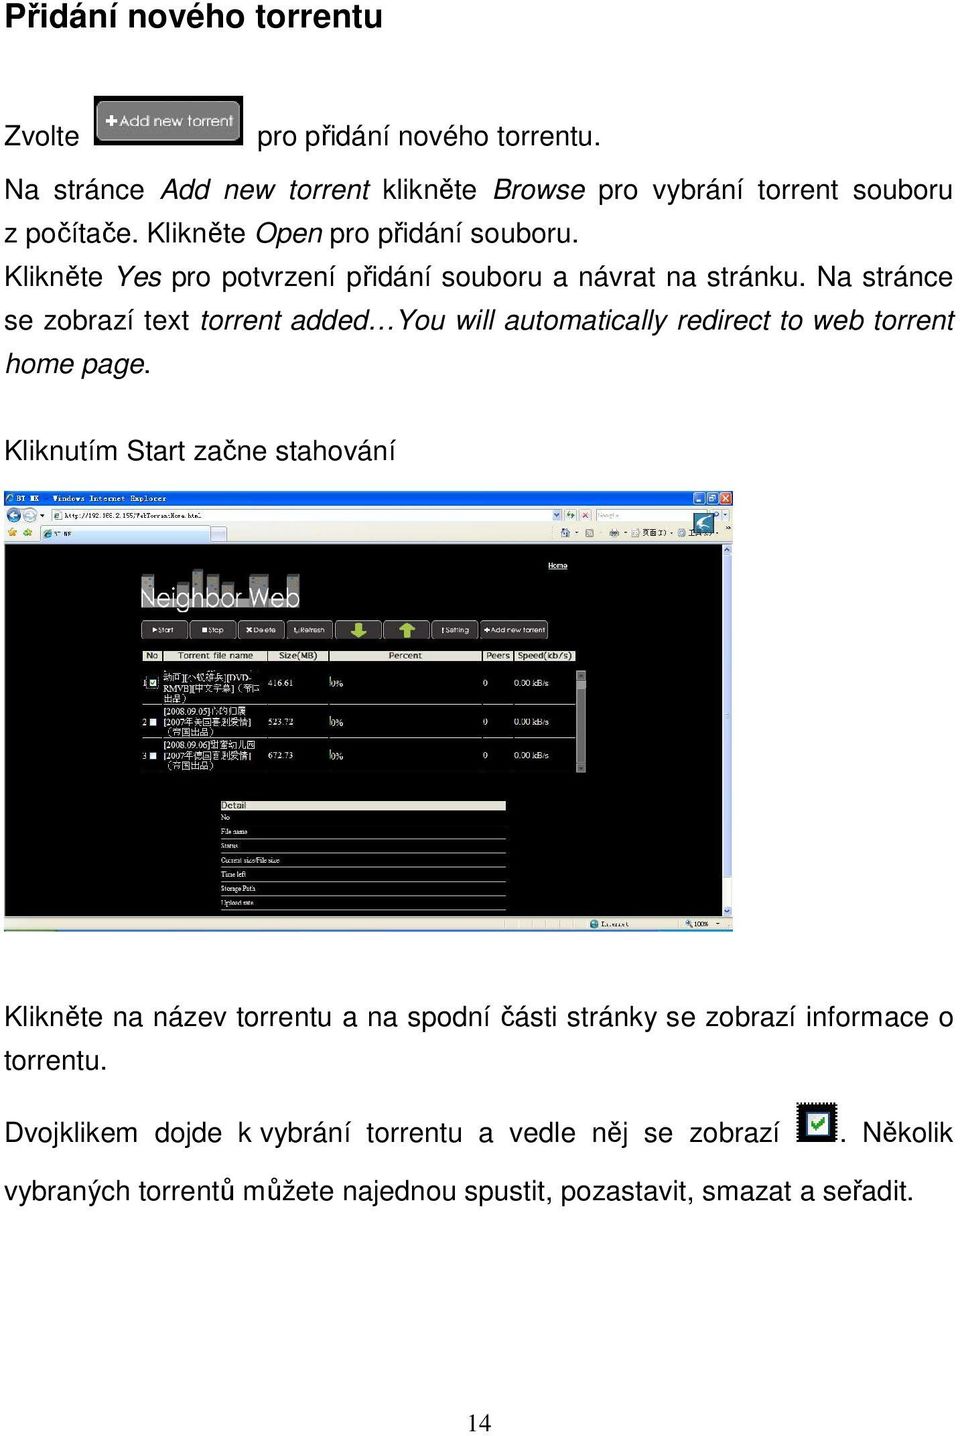 Na stránce se zobrazí text torrent added You will automatically redirect to web torrent home page.